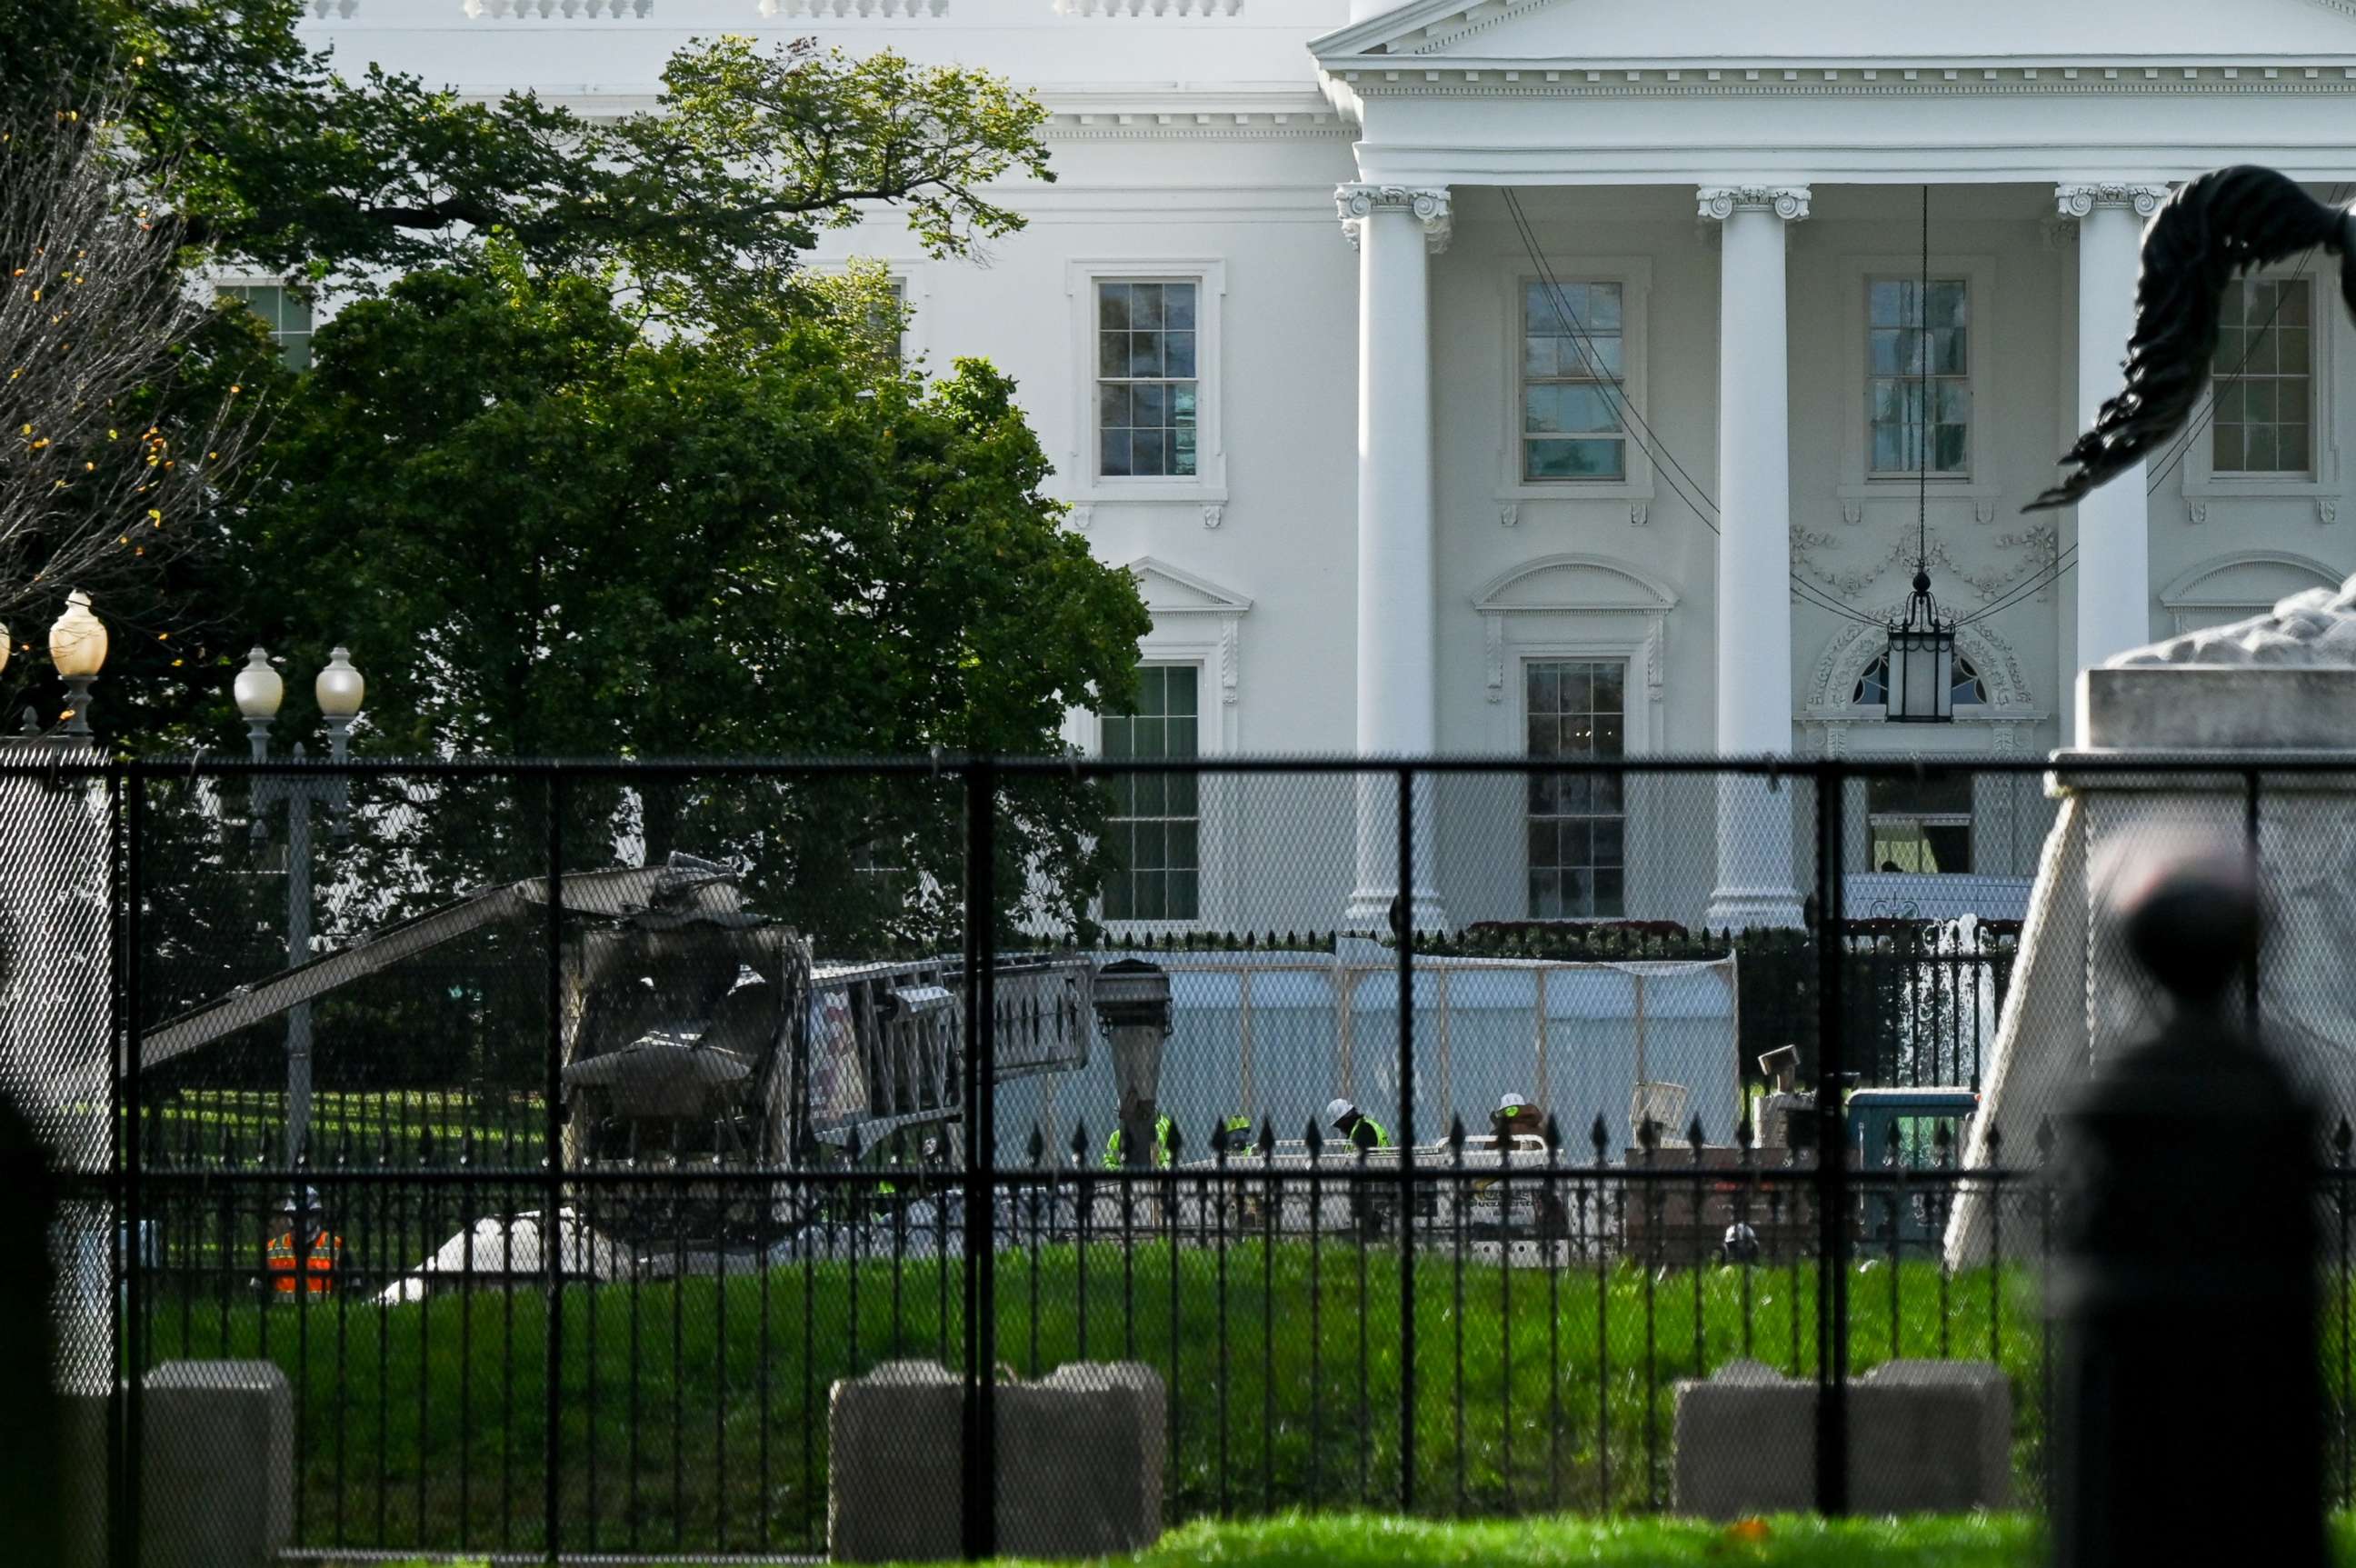 PHOTO: Workers are seen behind layers of security fencing in front of the White House the day before the presidential election in Washington, D.C., Nov. 2, 2020.